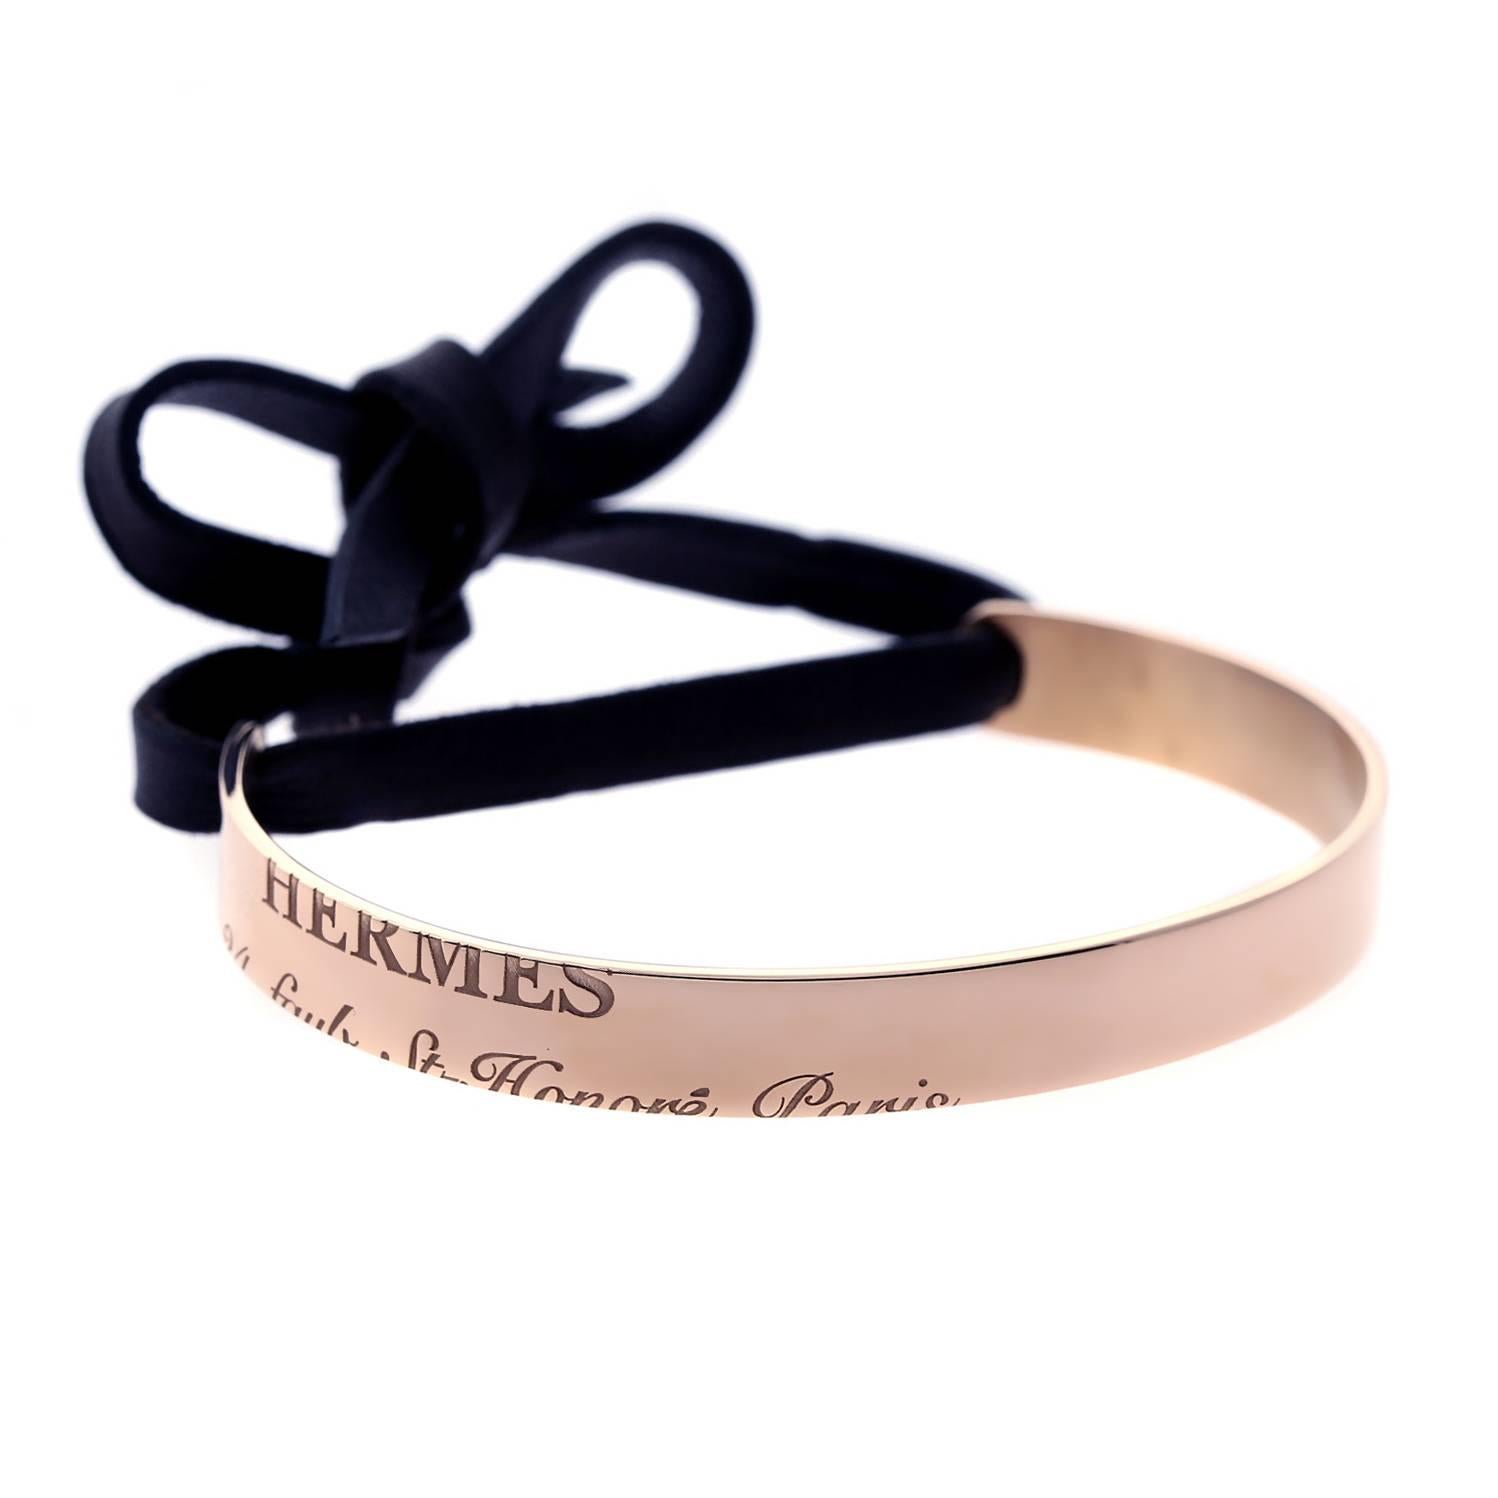 A chic authentic Hermes cuff featuring engravings of the brand maker and address in Paris in 18k rose gold, to seal the deal a contrasting black leather has been added which can be tied. Bracelet Length 16cm / 6.28in

This magnificent piece is